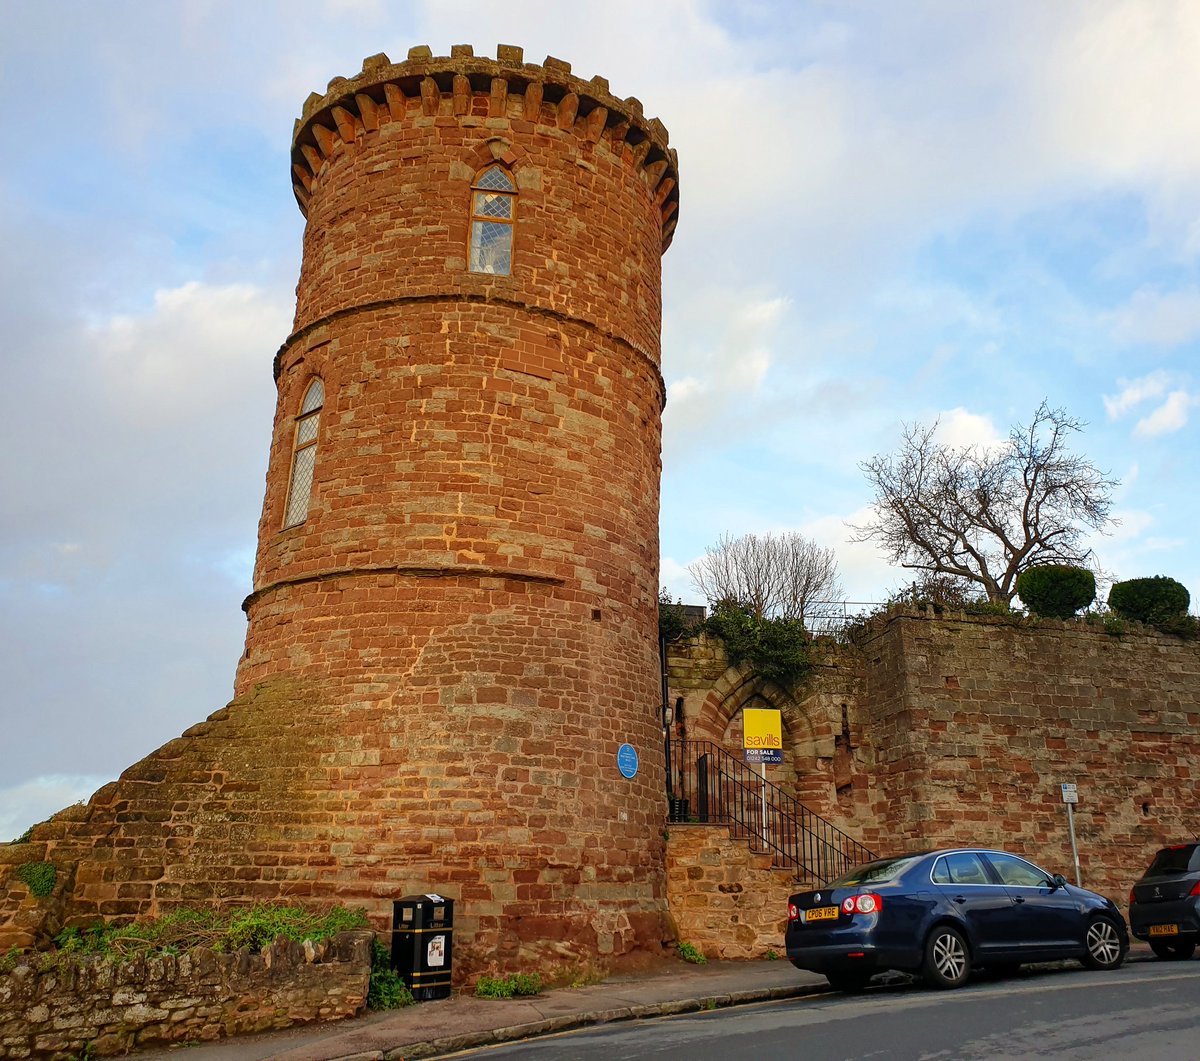 The Gazebo Tower was built in 1833, at the same time as the mock gothic town walls, during the construction of Wilton Road.

It's actually a private residence, which is currently for sale, and could be yours for the bargain price of £425,000.

#rossonwye #herefordshire #winter